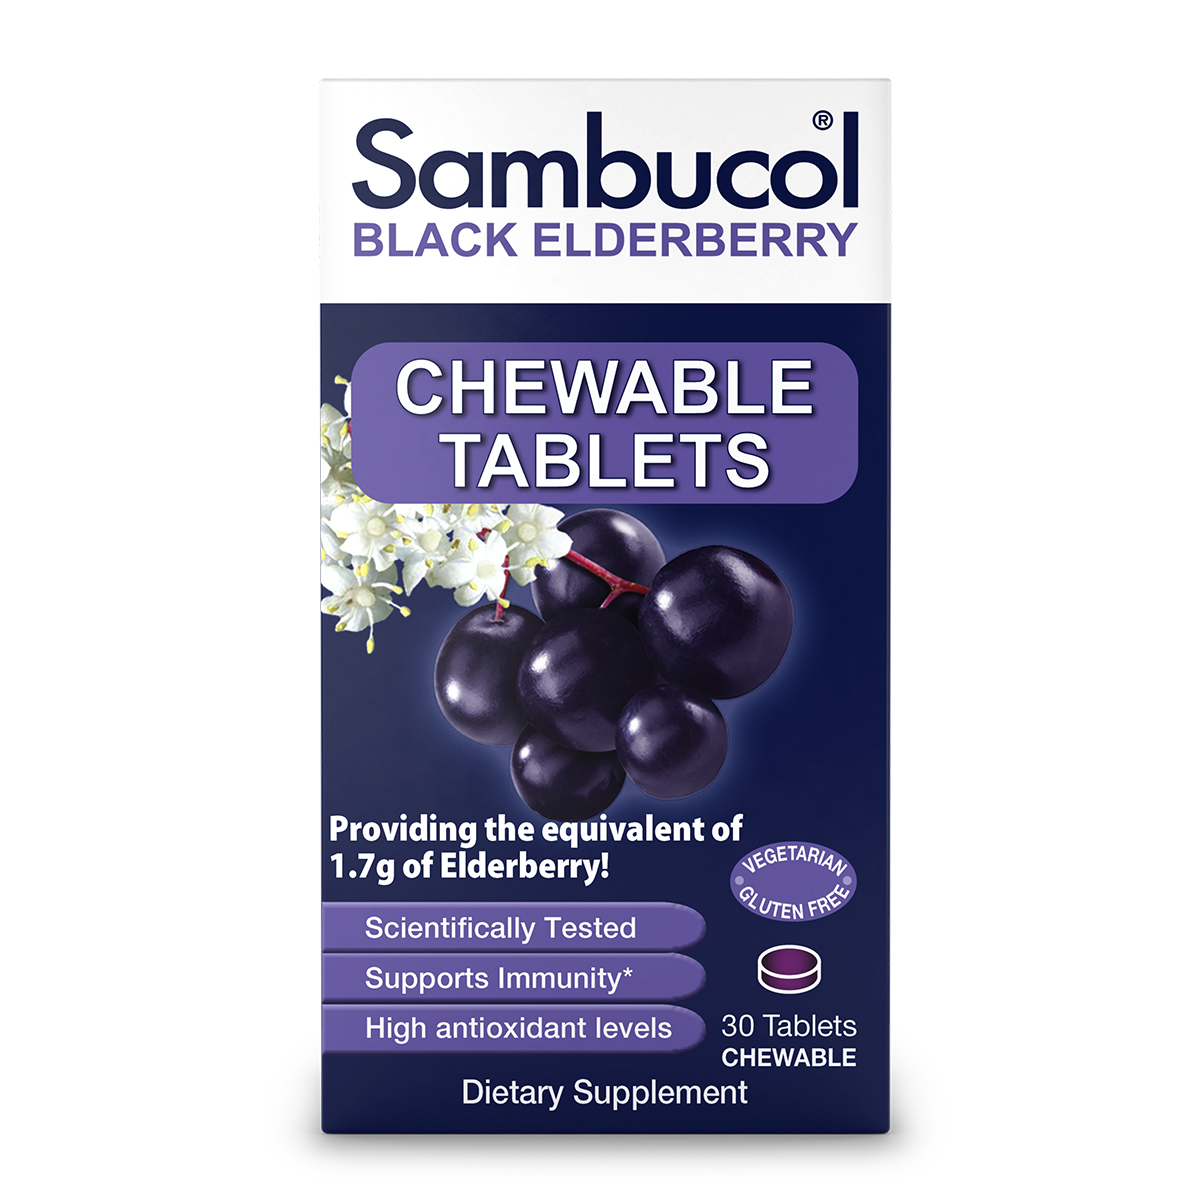 Sambucol Black Elderberry Immune Support Chewable Tablets with Vitamin C, 30 Count - image 1 of 10